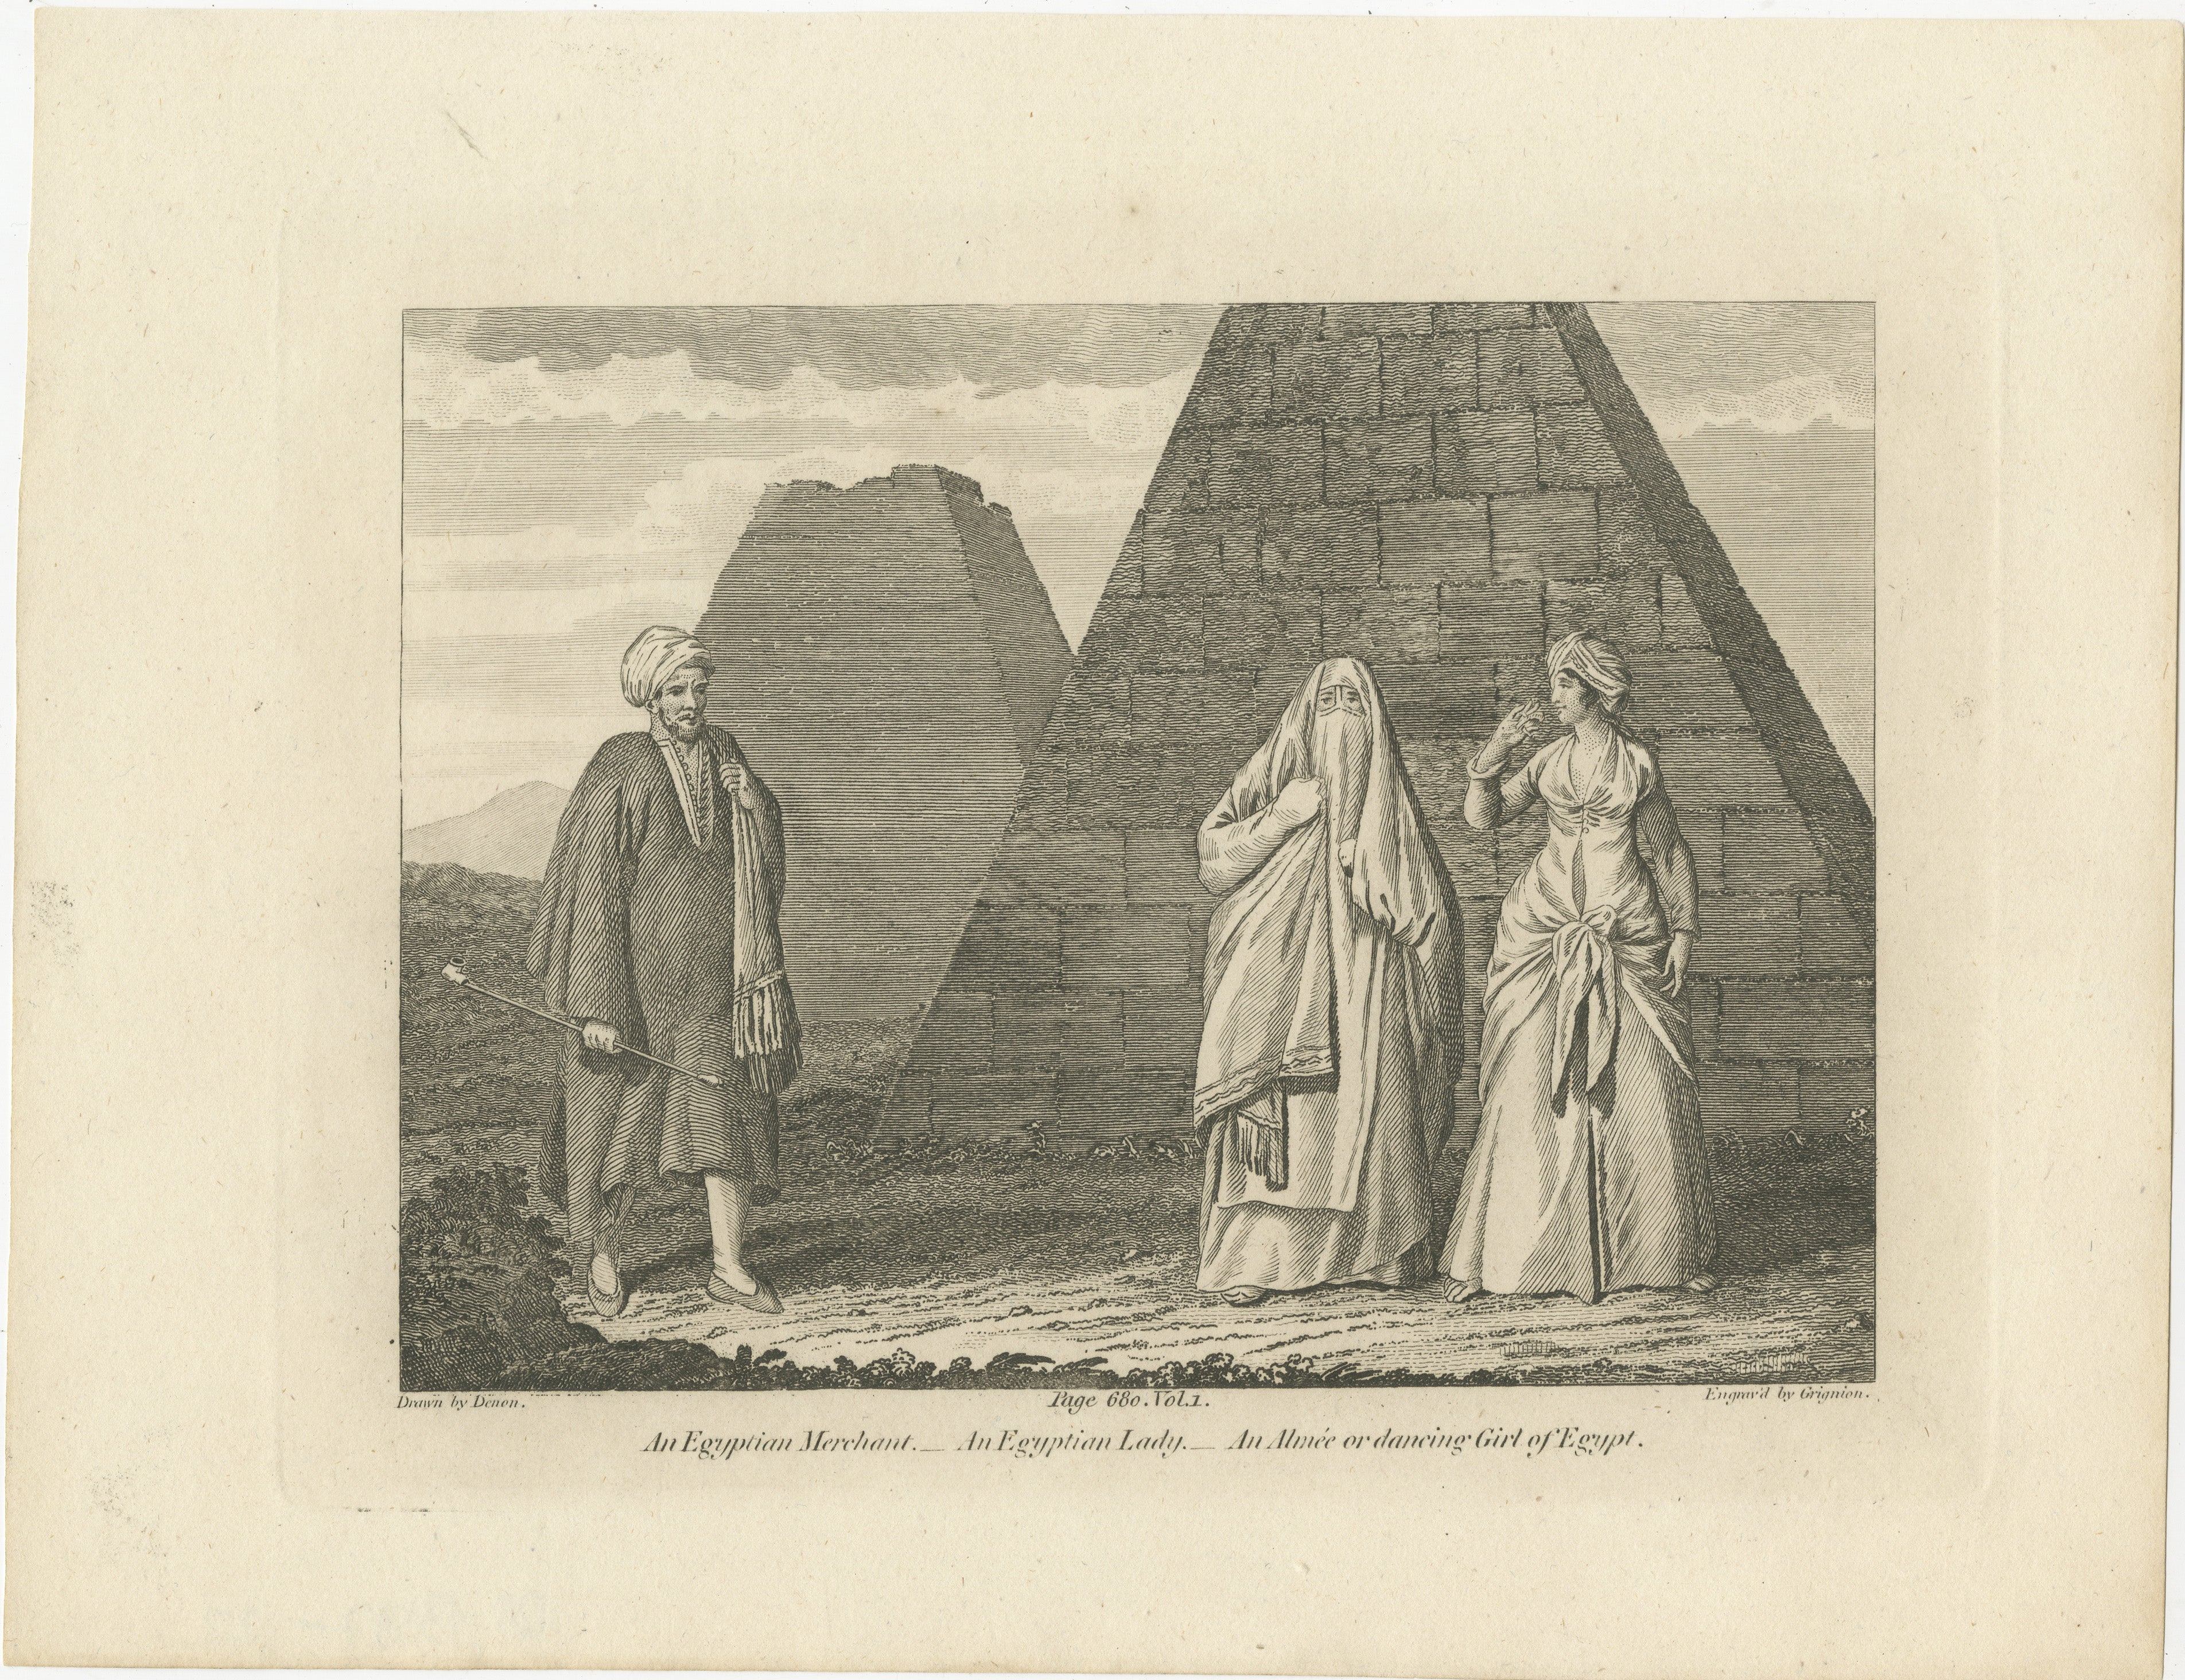 This engraving portrays three distinct figures: an Egyptian Mamluk, an Egyptian lady, and an Almee or dancing girl, representative of Egypt's social diversity. The Mamluk stands prominently, symbolizing military authority, while the women illustrate